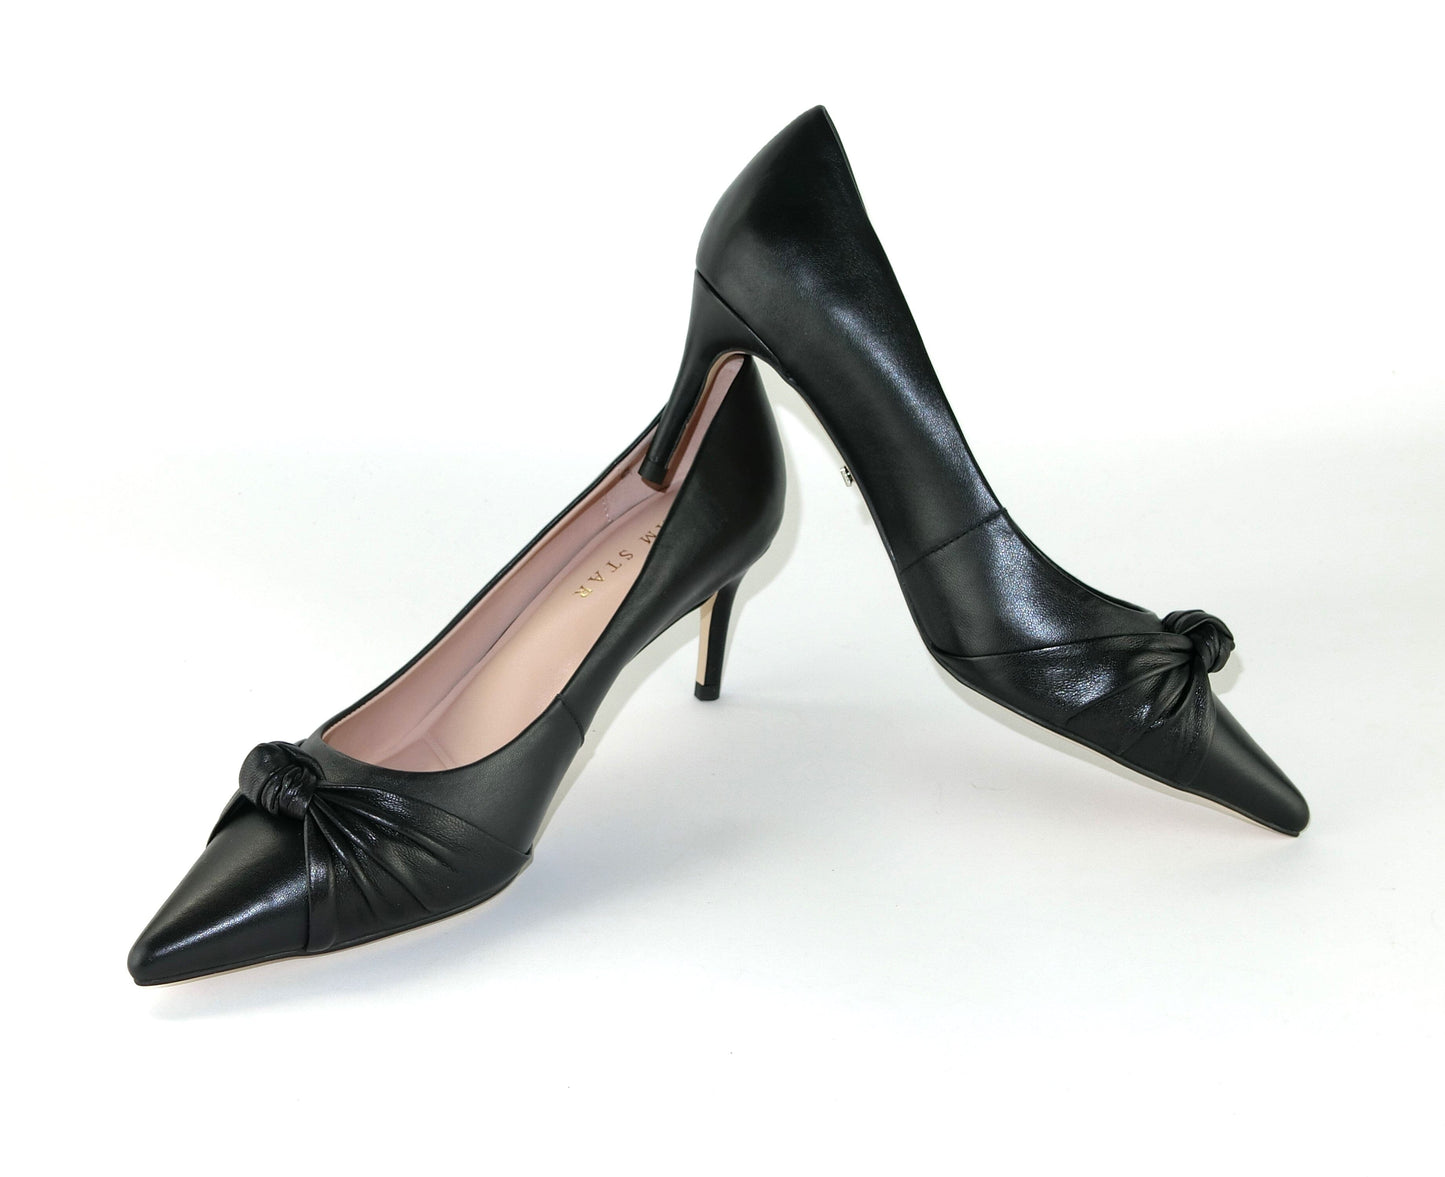 SS23004 Leather court shoes with knot design - Black and Tan ladies shoes Sam Star shoes Black 37/4 